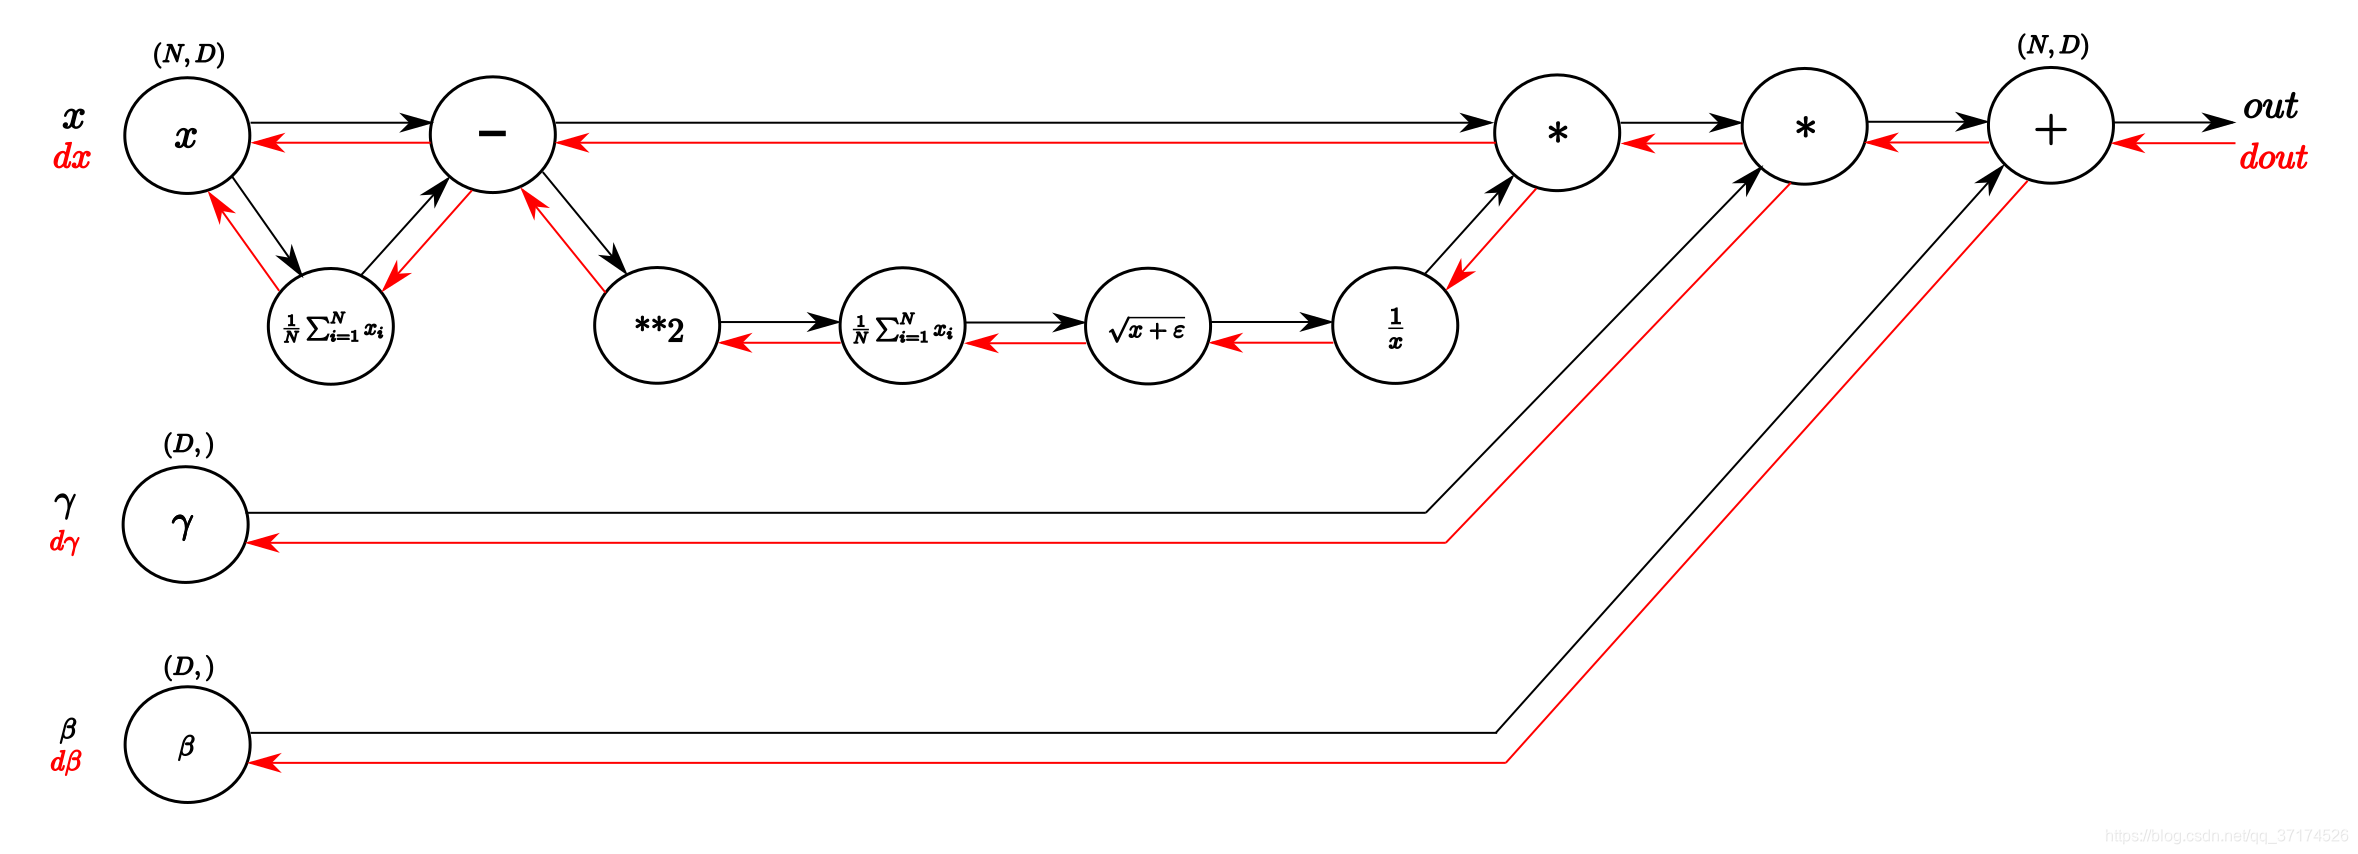 Computational graph of the BatchNorm-Layer. From left to right, following the black arrows flows the forward pass. The inputs are a matrix X and gamma and beta as vectors. From right to left, following the red arrows flows the backward pass which distributes the gradient from above layer to gamma and beta and all the way back to the input.